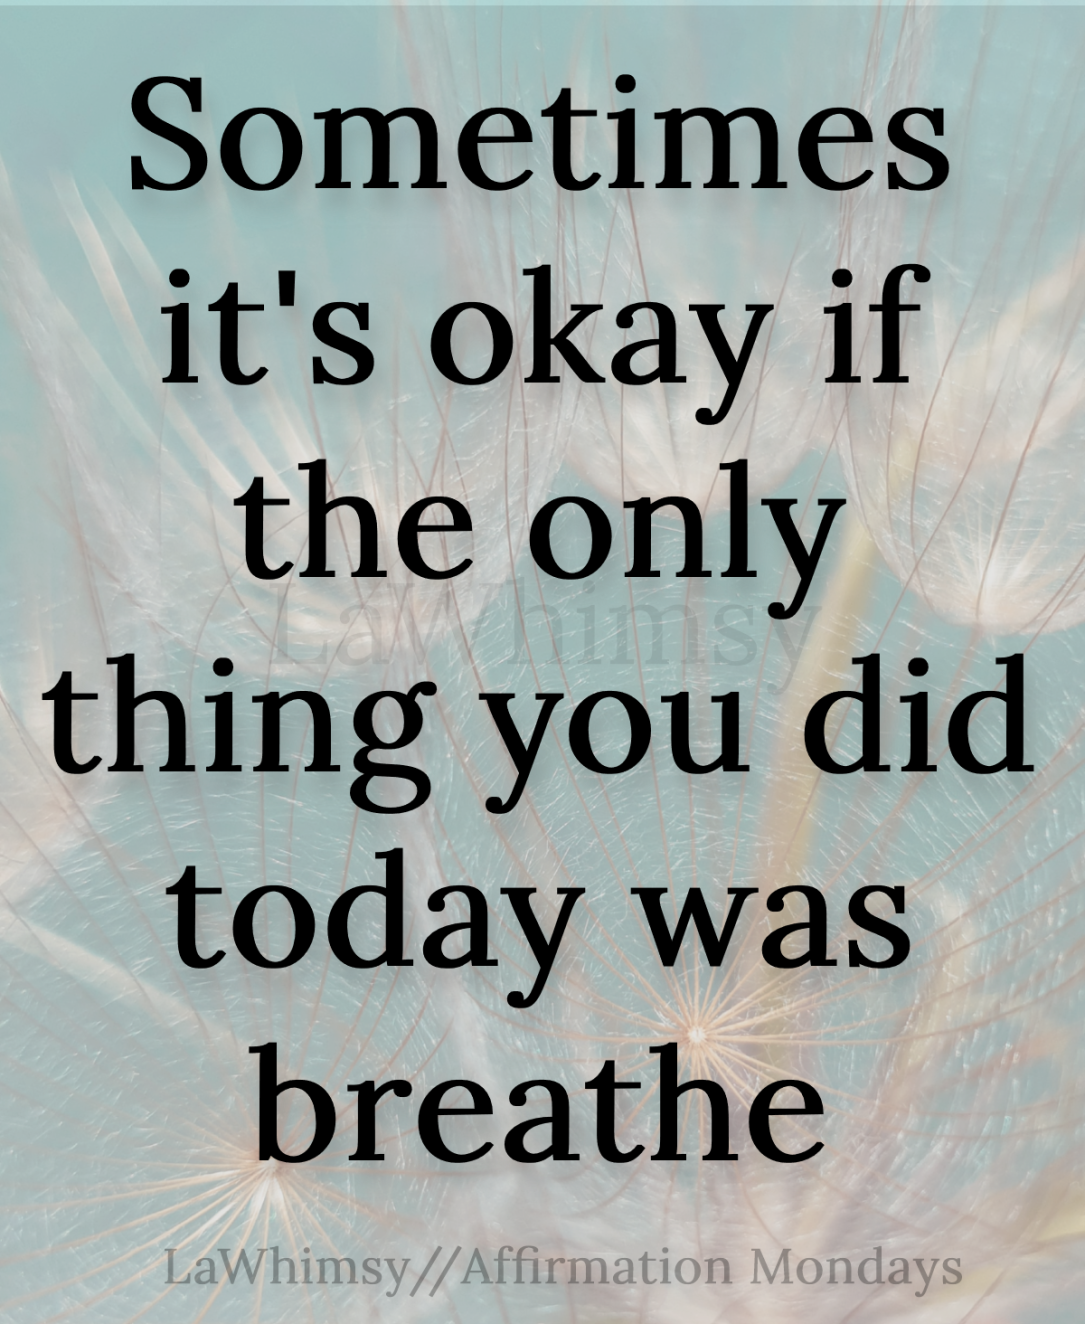 Sometimes it's okay if the only thing you did today was breathe quote Affirmation Mondays 347 via LaWhimsy